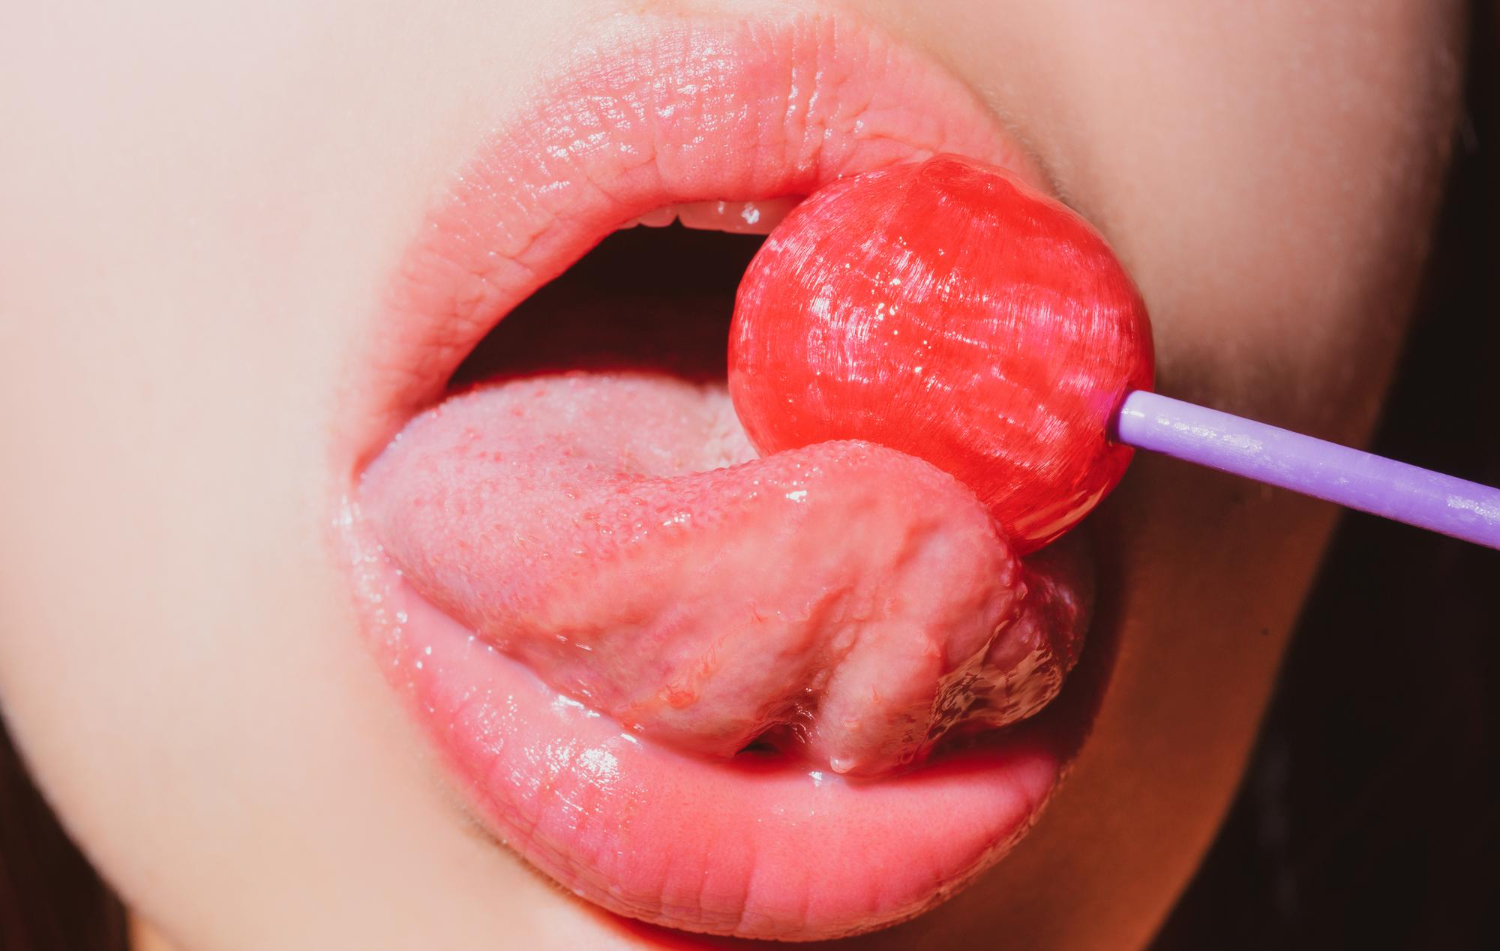 woman licking lollipop art banner red lips with lollipop sexy red female mouth tongue with lollipop